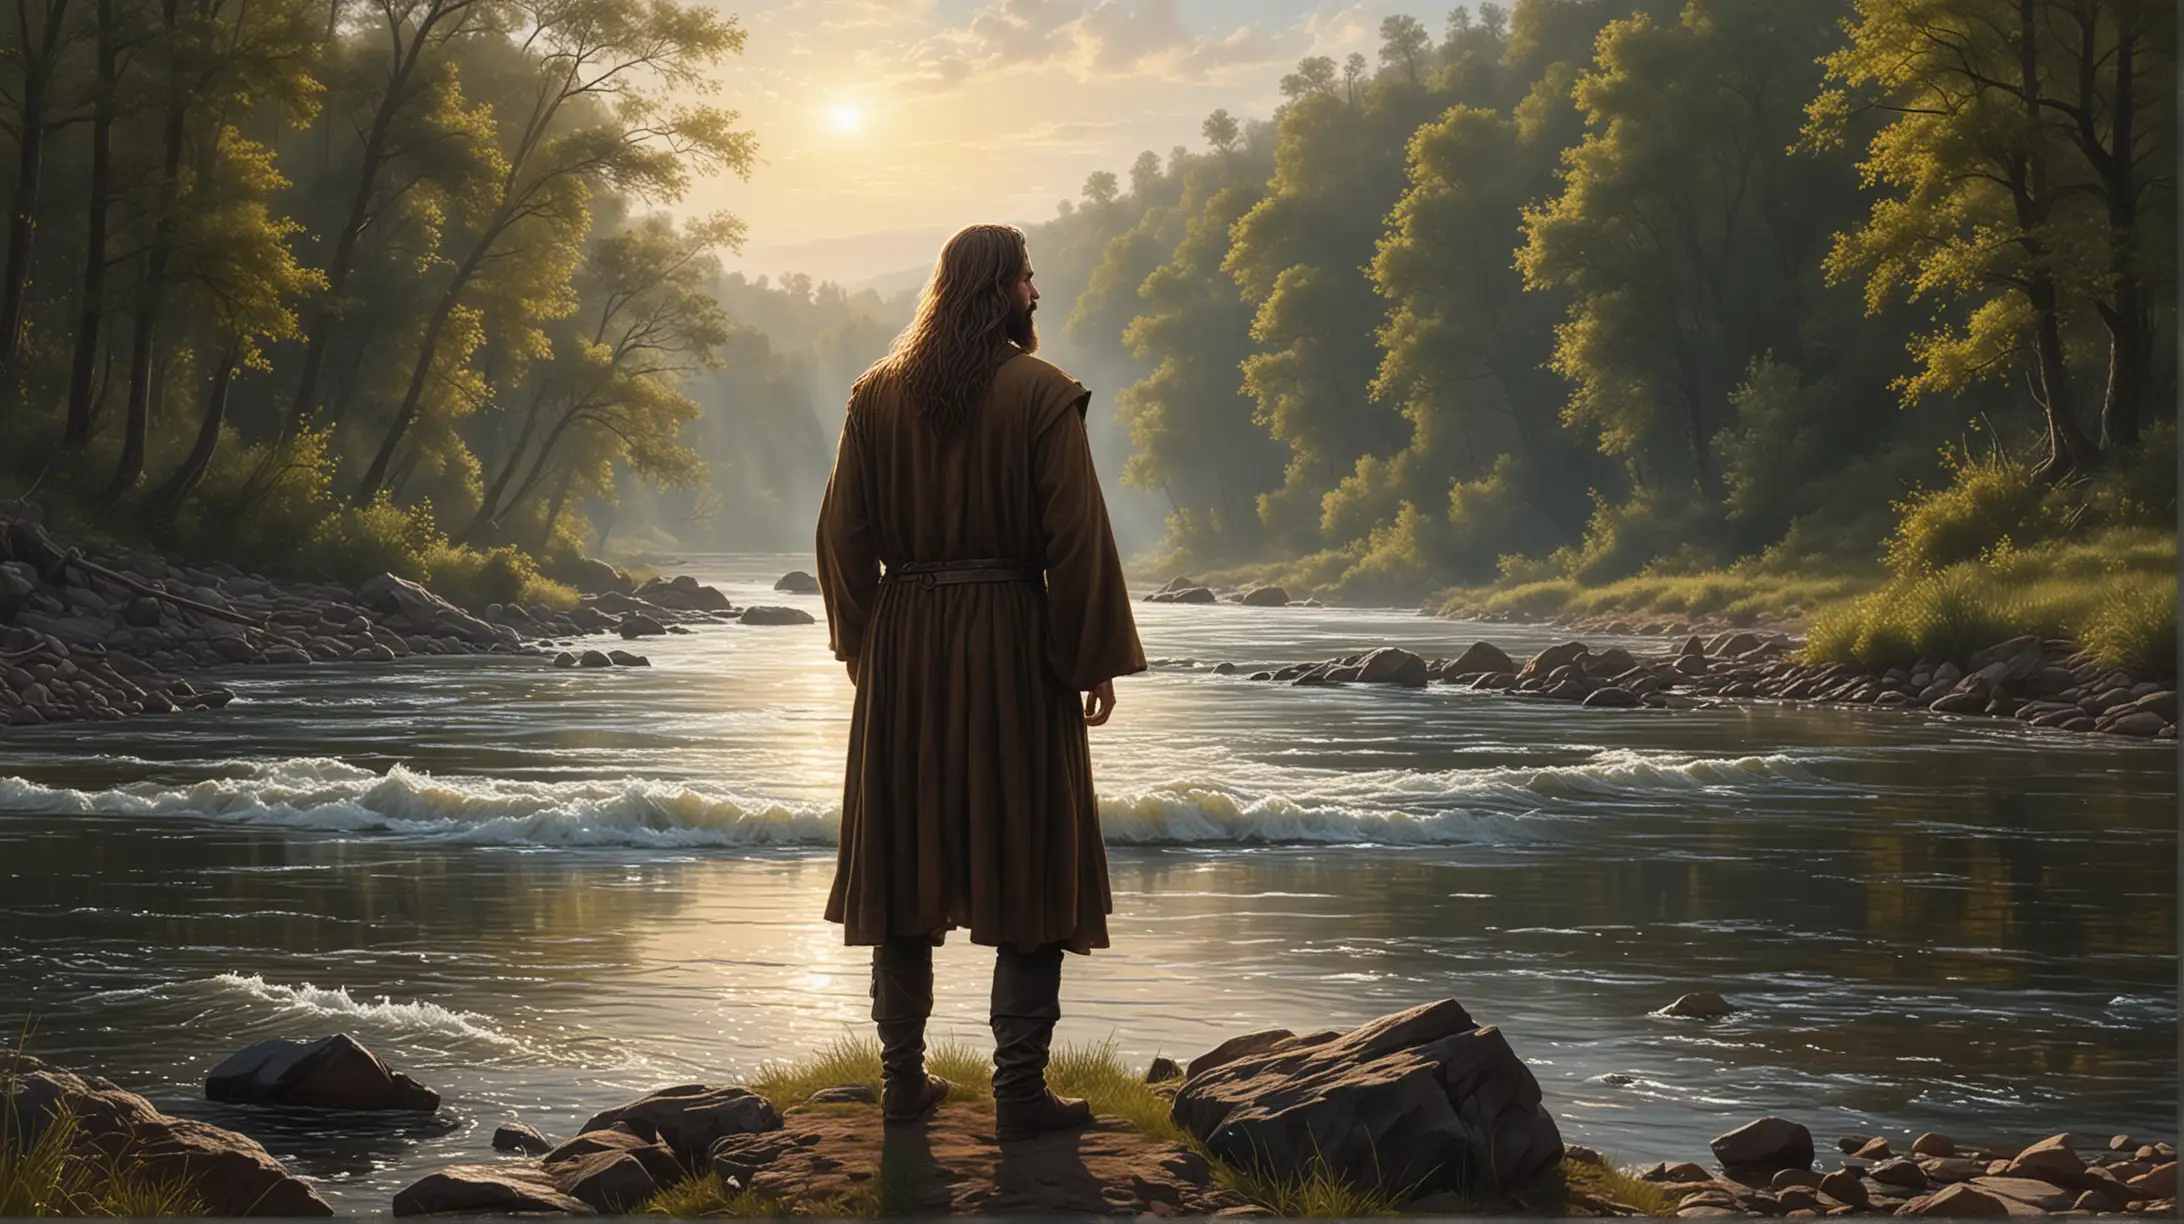 a painting of a man with long hair and beard standing in front of a river, daniel, male art, prophetic art, by Emanuel Büchel, by Roman Bezpalkiv, inspired by David Macbeth Sutherland, michael ancel, michael, biblical art style, by Andrzej Wróblewski, tolkien and michael komarck, biblical art, ismail, dark